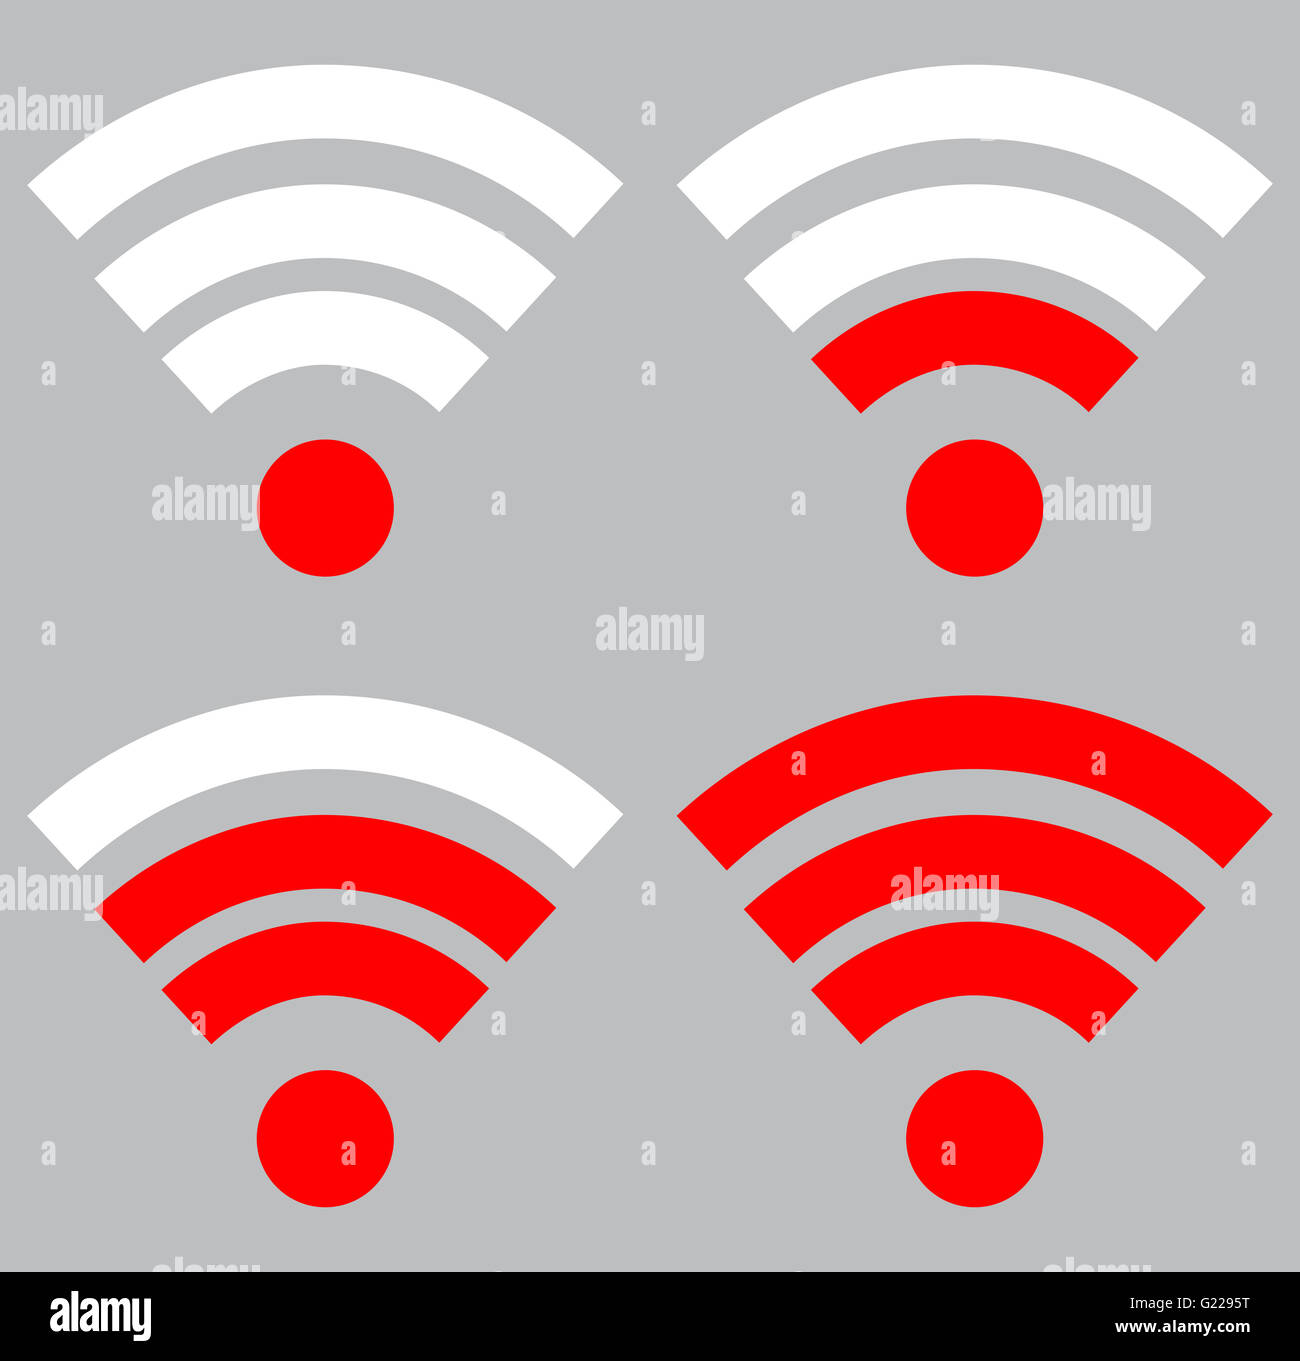 Wi fi signal strength. Connection wireless and strength wi-fi signal internet, indicator level wifi .Vector flat design illustra Stock Photo